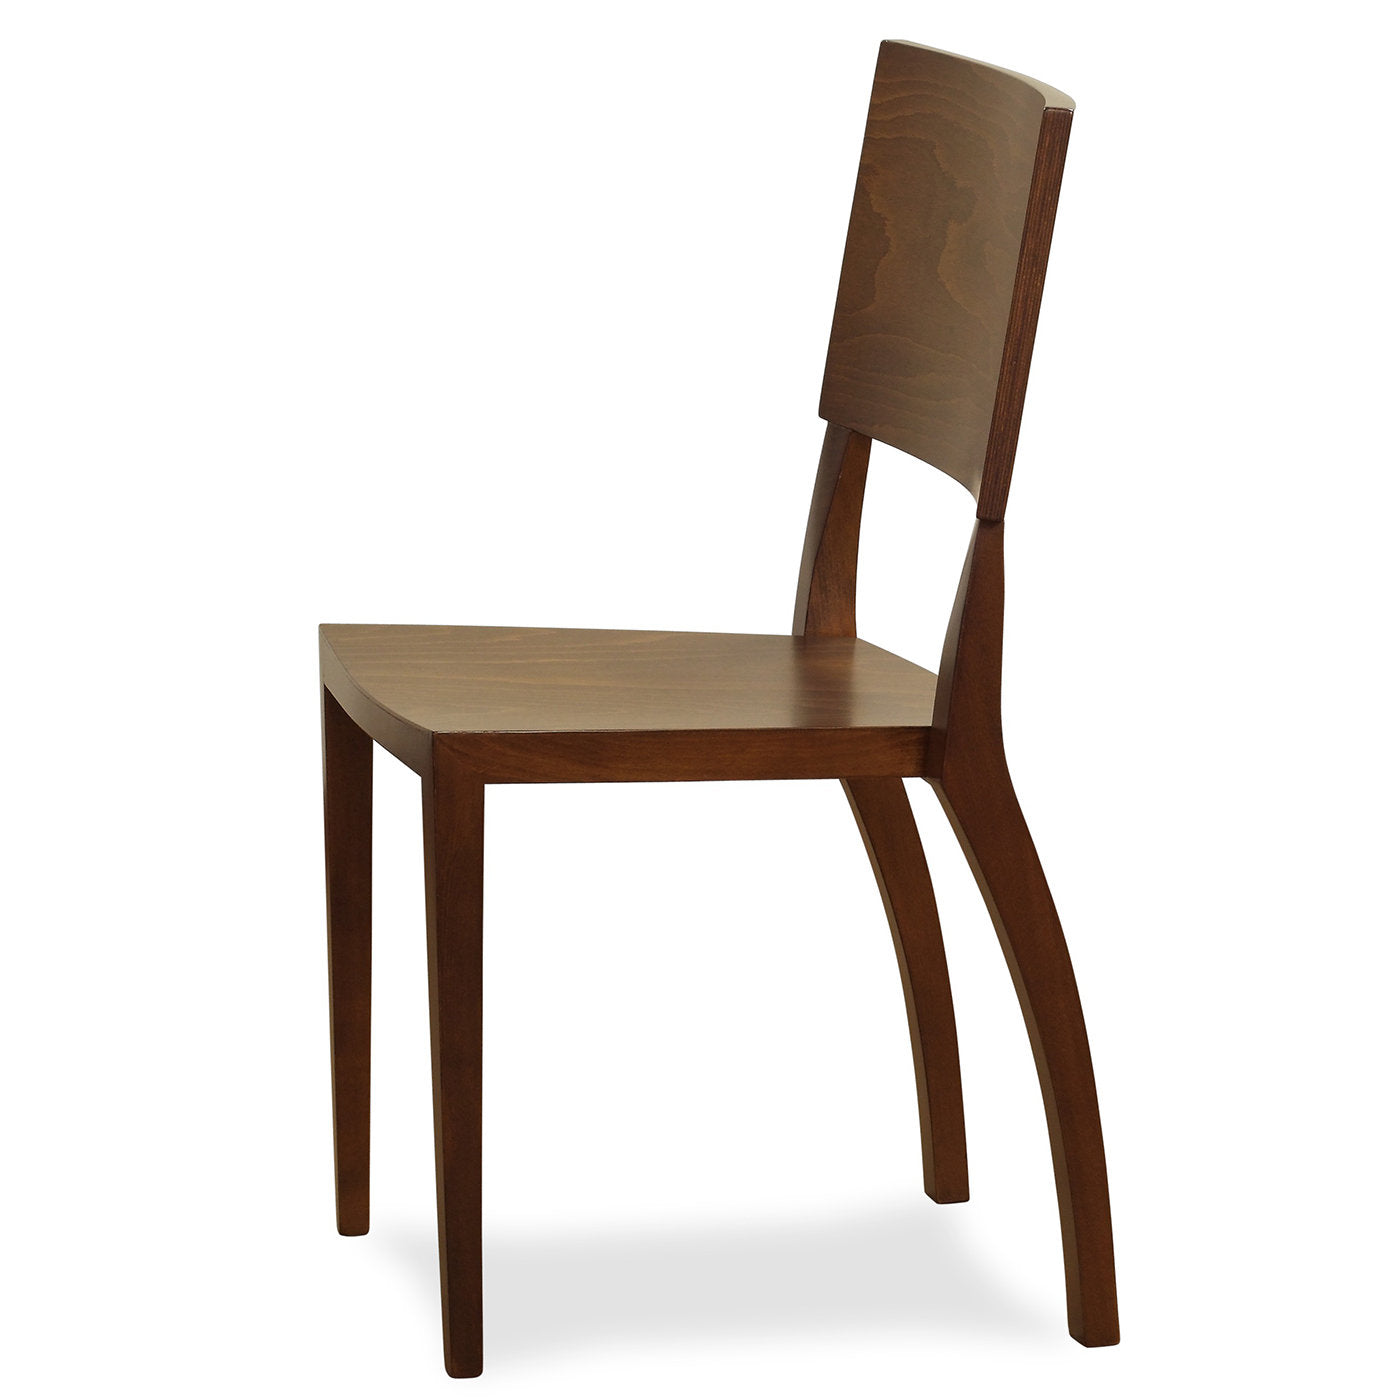 911BPL Set of 2 Chairs - Alternative view 2